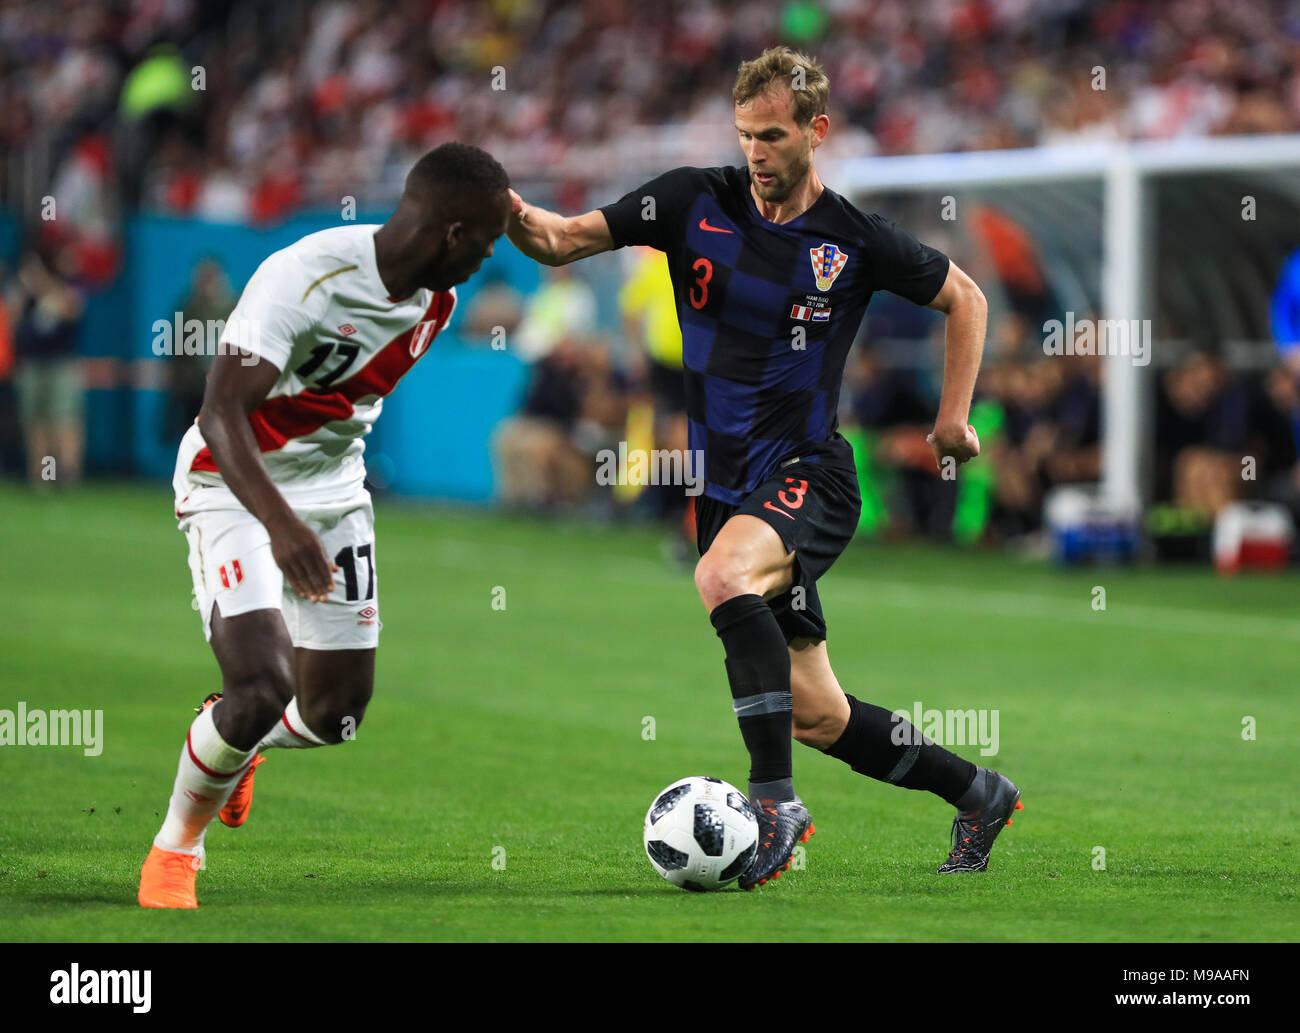 Miami Gardens, Florida, USA. 23rd Mar, 2018. Croatia defender Ivan Strinic (3) drives the ball challenged by Peru defender Luis Advincula (17) during a FIFA World Cup 2018 preparation match between the Peru National Soccer Team and the Croatia National Soccer Team at the Hard Rock Stadium in Miami Gardens, Florida. Credit: Mario Houben/ZUMA Wire/Alamy Live News Stock Photo